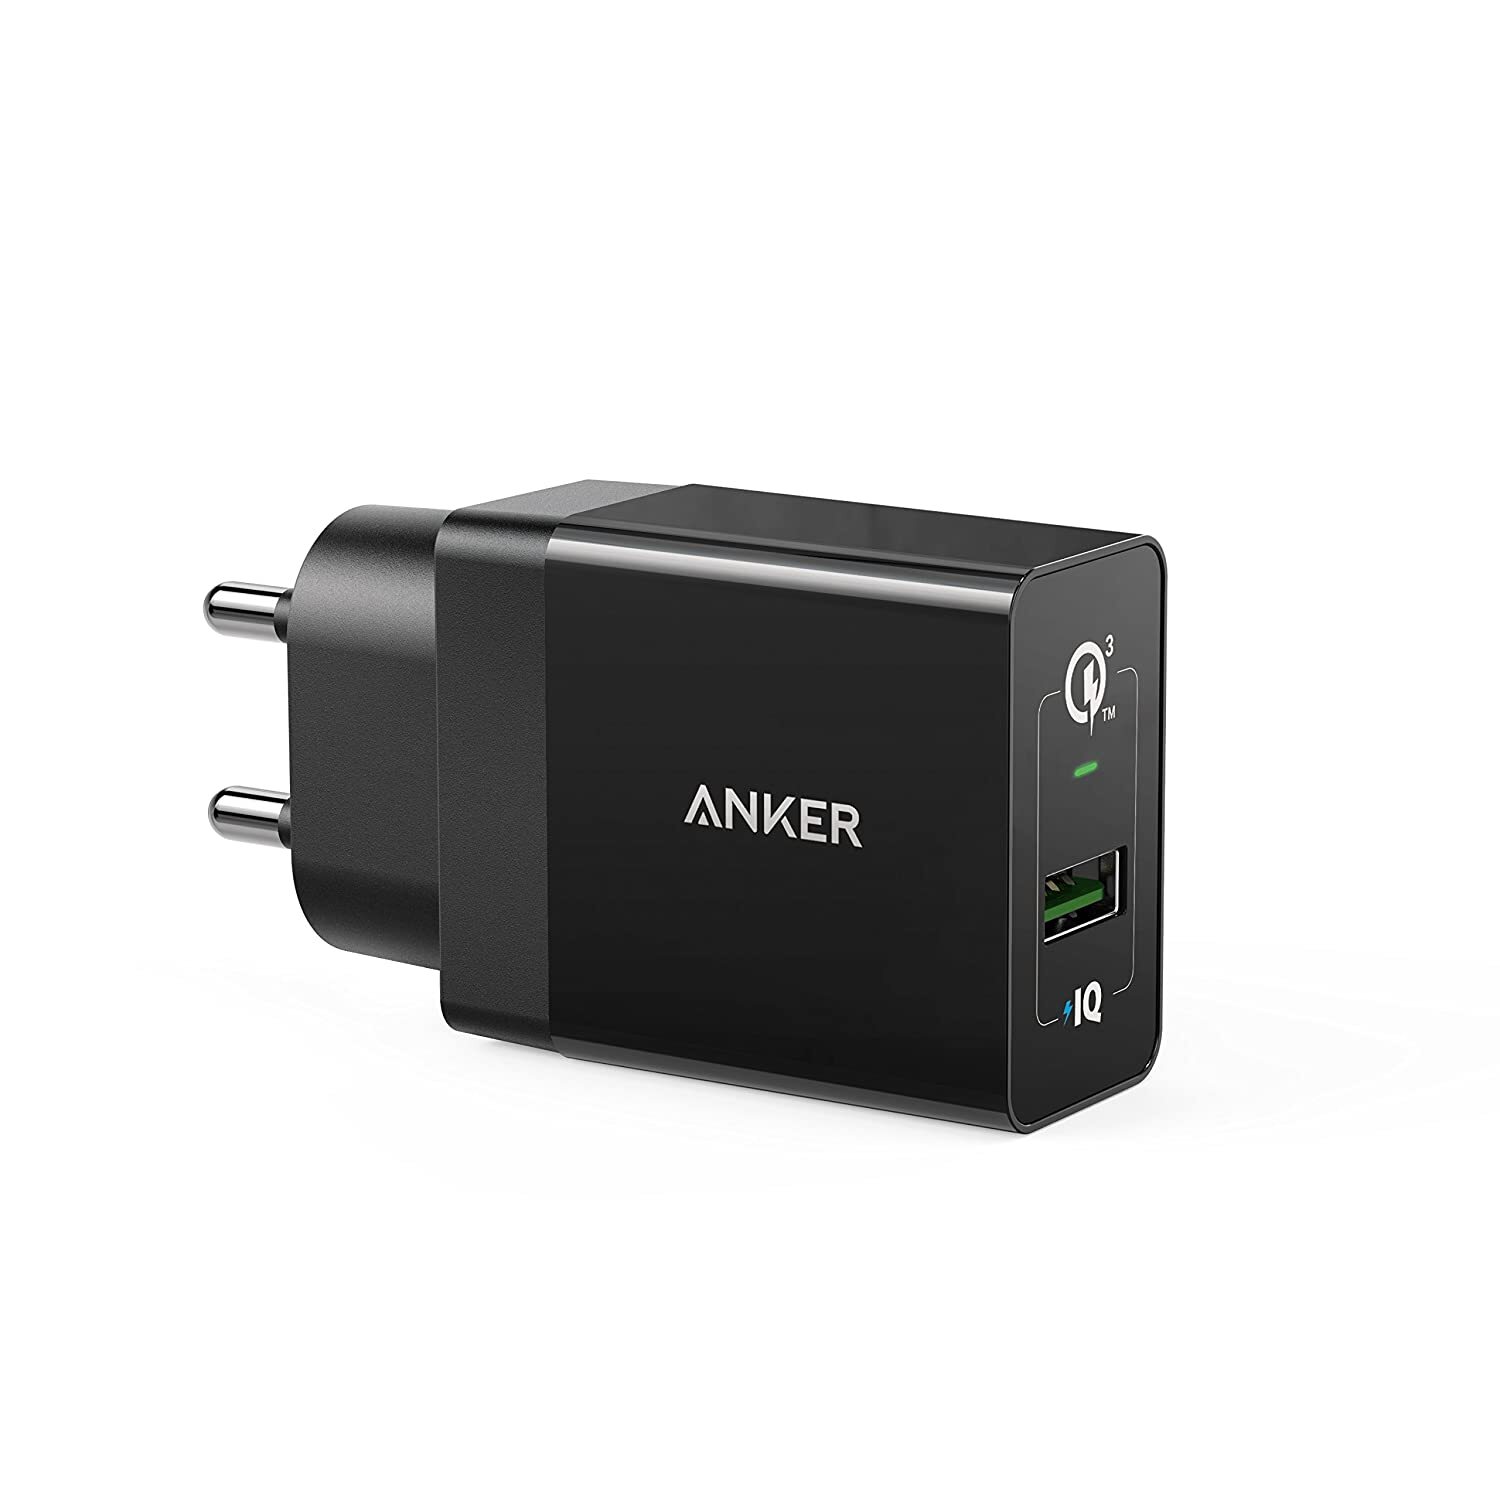 Anker PowerPort+ QC 3.0 (MI-Certified) USB Wall Charger for Galaxy S7/S6/Edge/Plus, Note 5/4, LG G4, HTC One A9/M9, Nexus 6, iPhone, iPad and More with 18 Months Warranty (Black)-M000000000454 www.mysocially.com